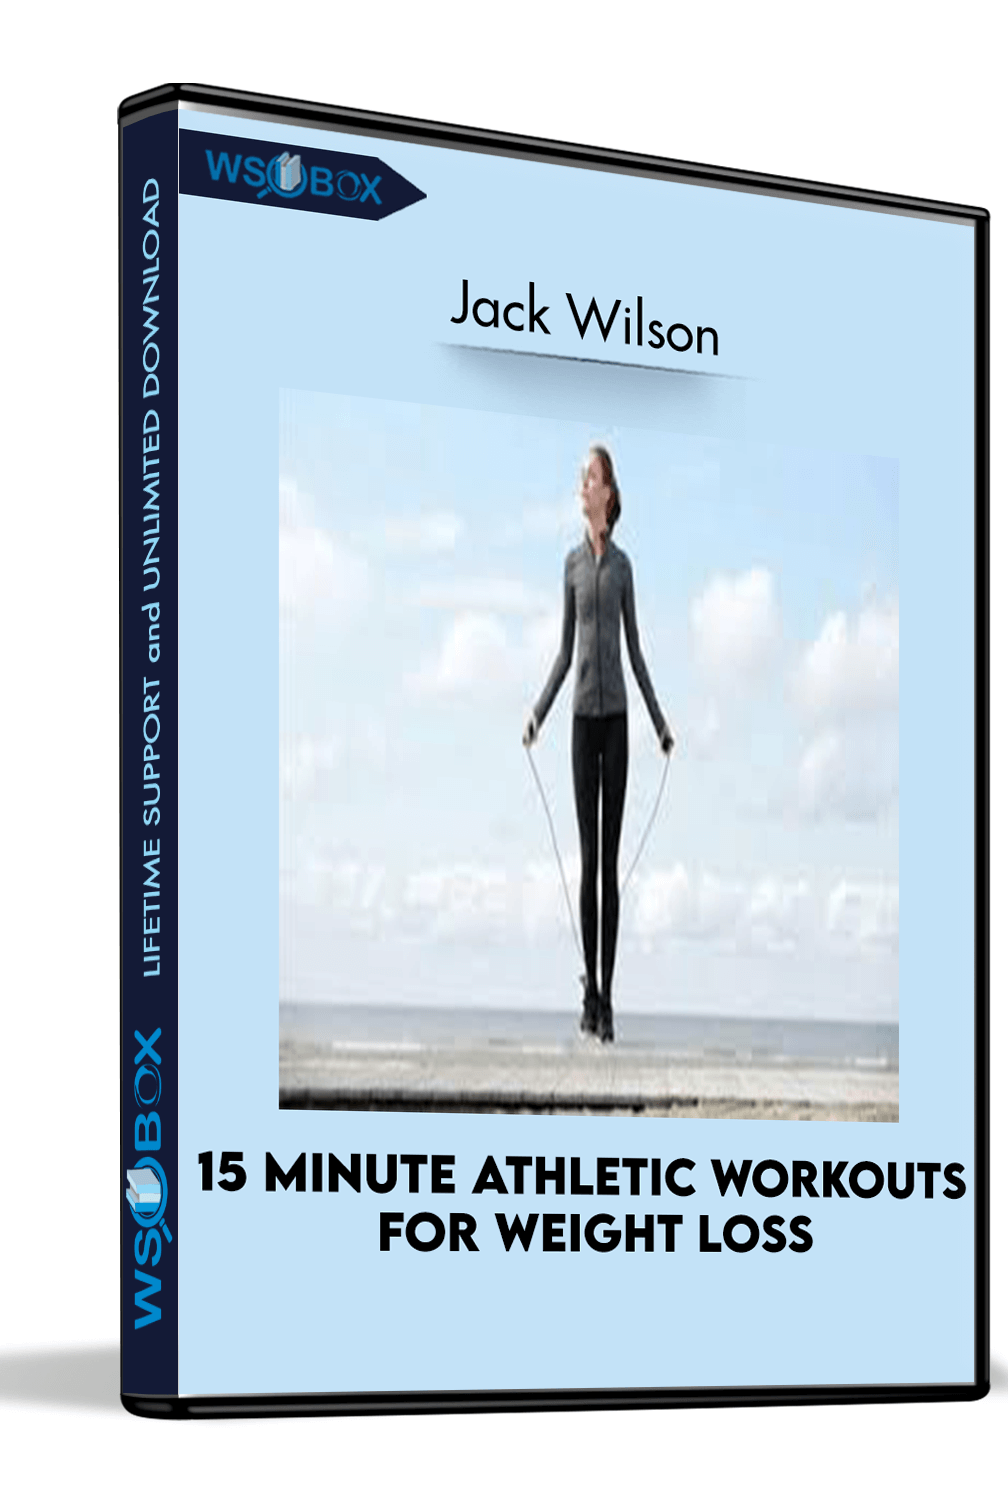 15 Minute Athletic Workouts for Weight Loss – Jack Wilson